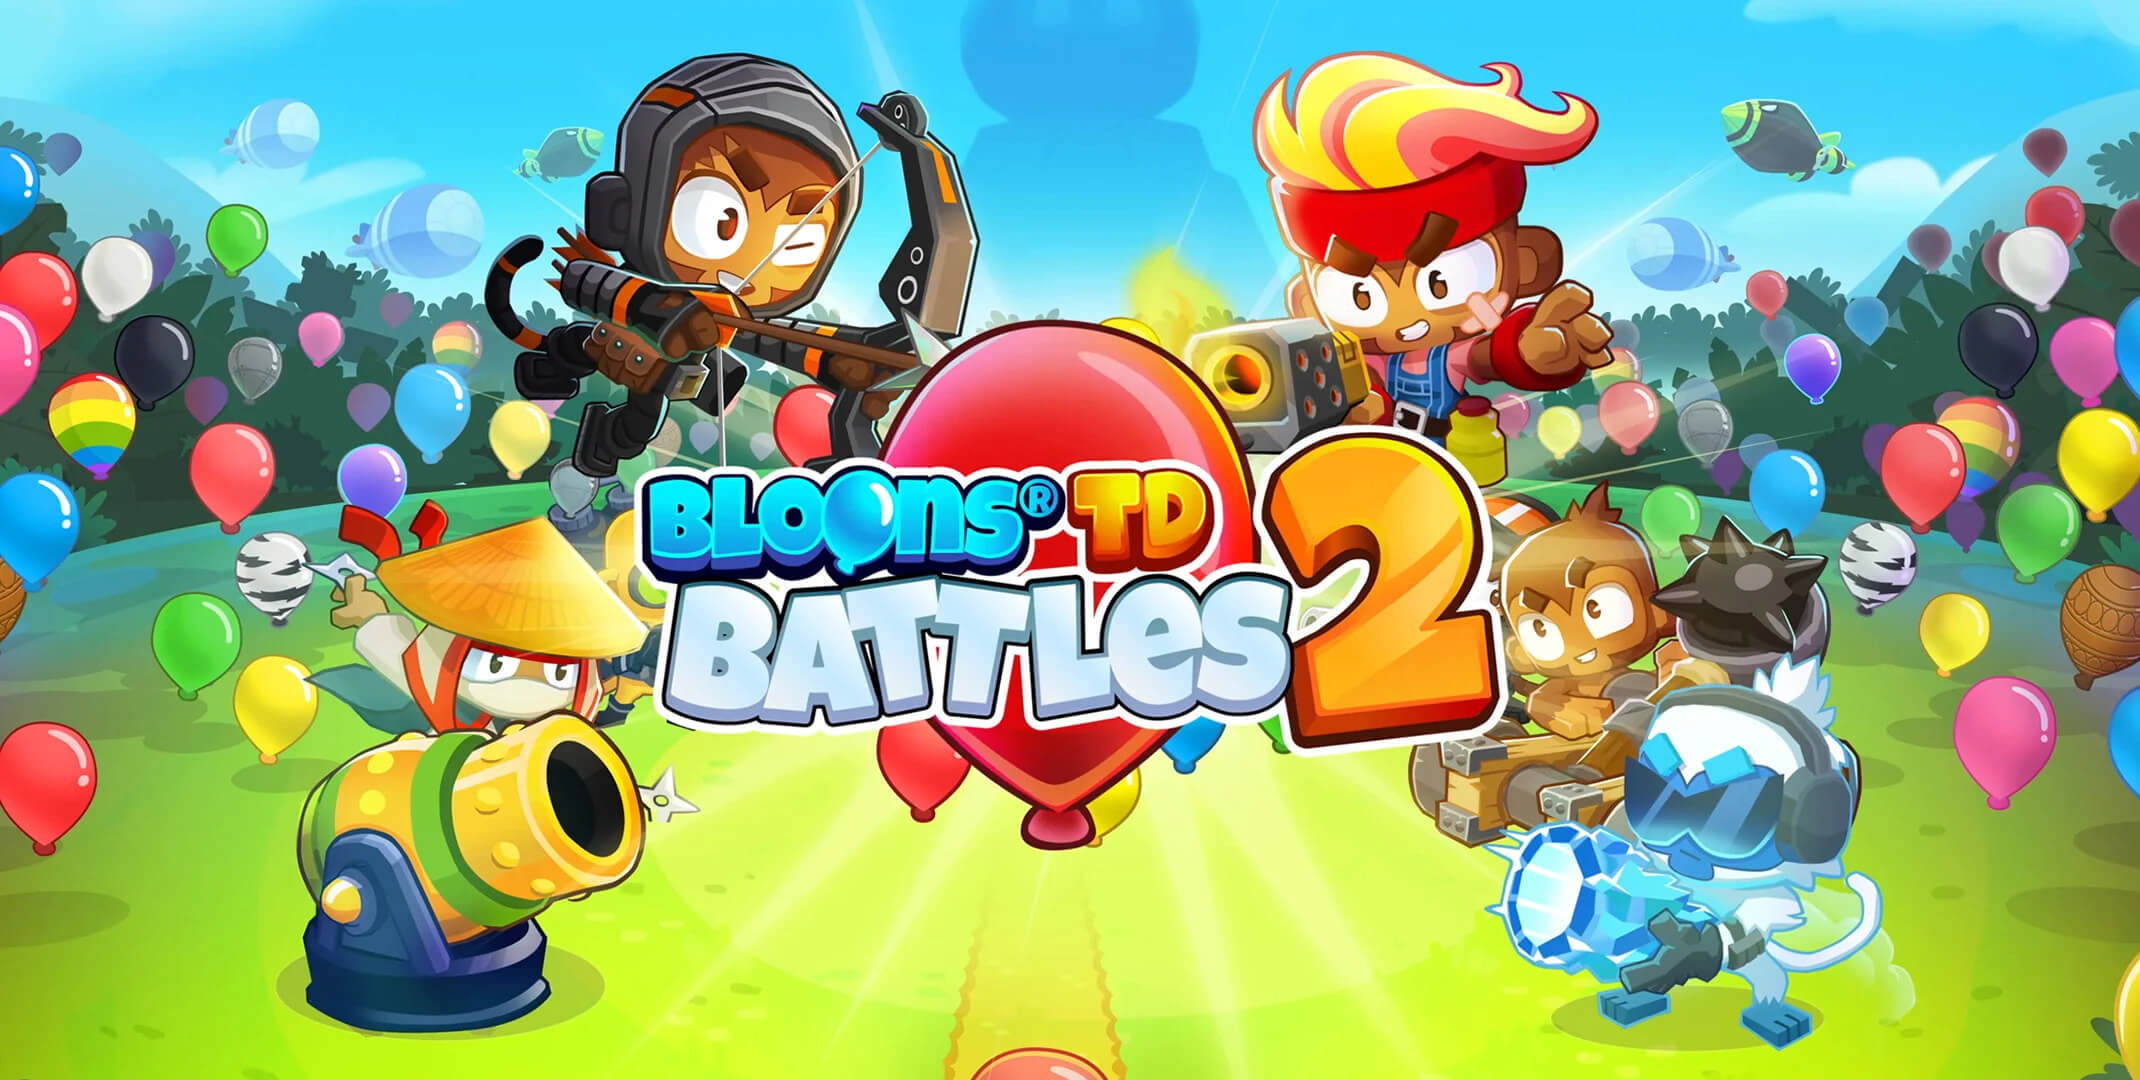 Bloons battle 2. Bloons Tower Defense 2. Блунс ТД. Bloons td Battles. Блунс ТД 6.